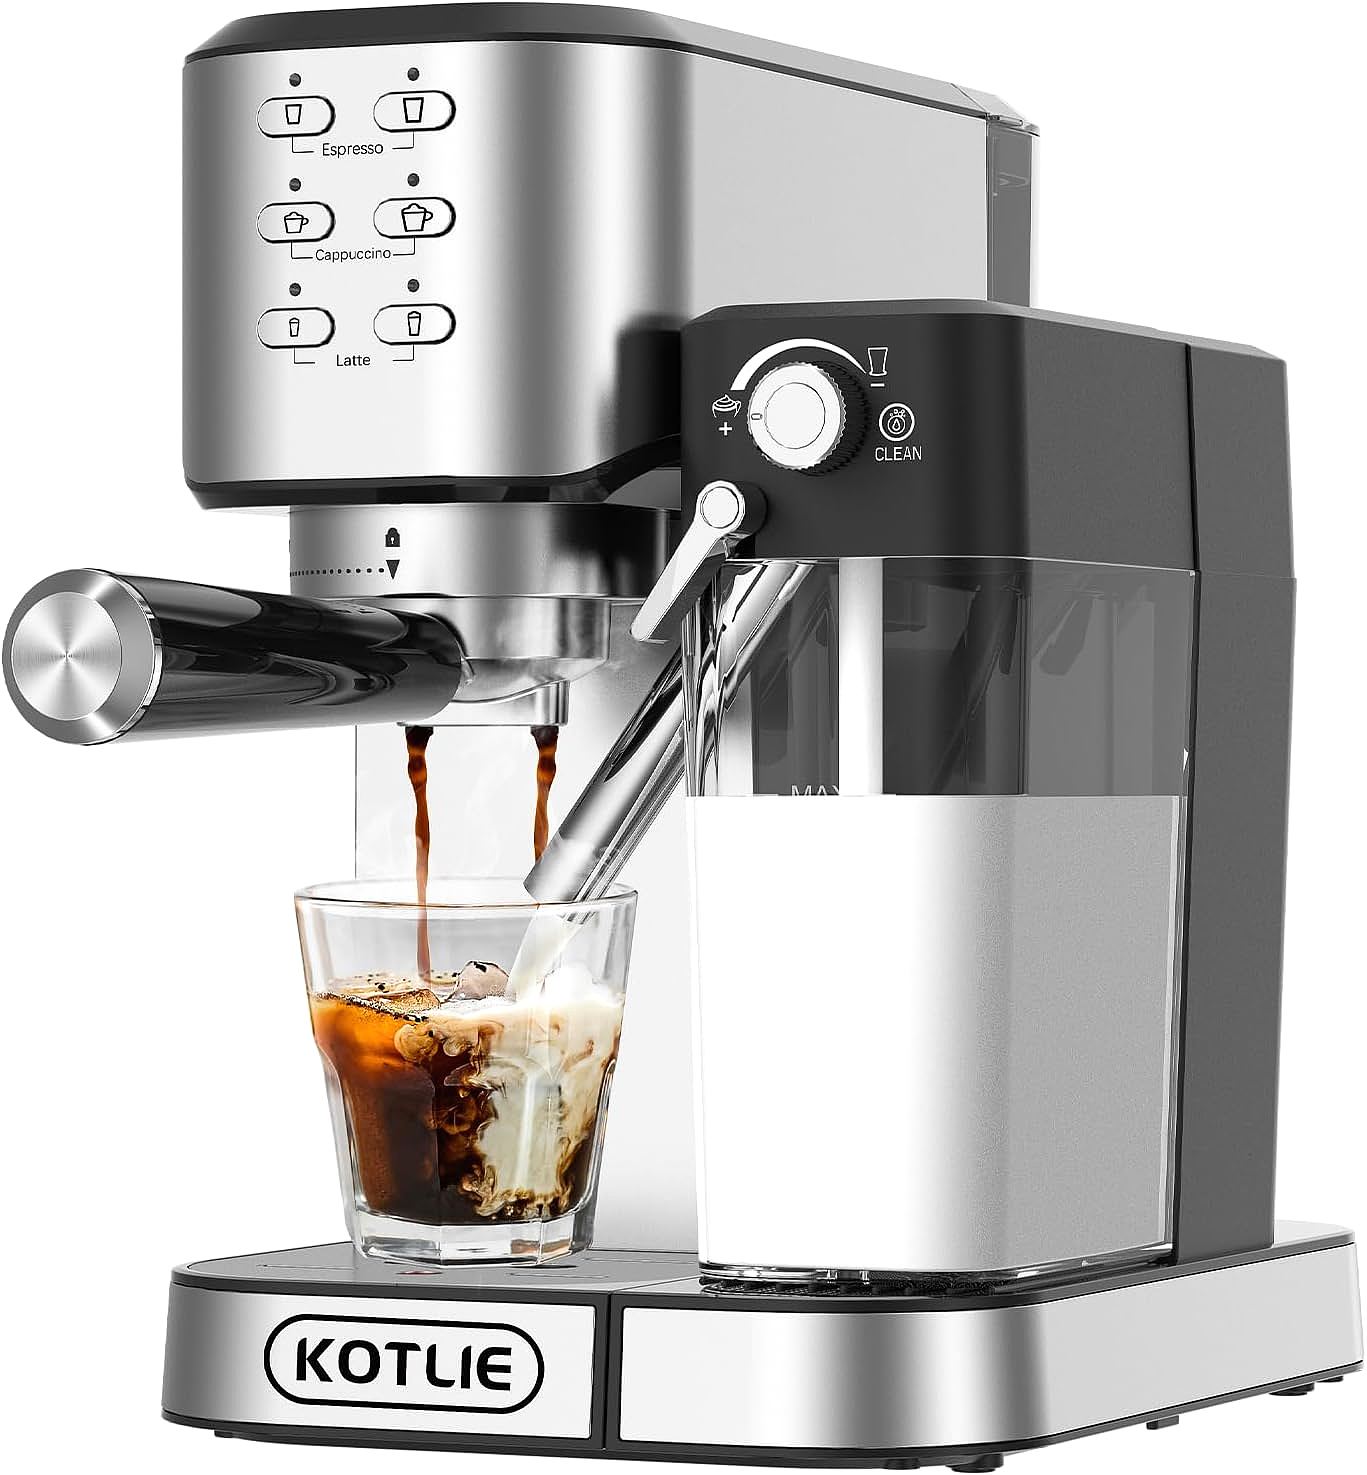 Kotlie CM5180 Espresso Coffee Machine: An Easy Solution for Brewing Delicious Coffee at Home